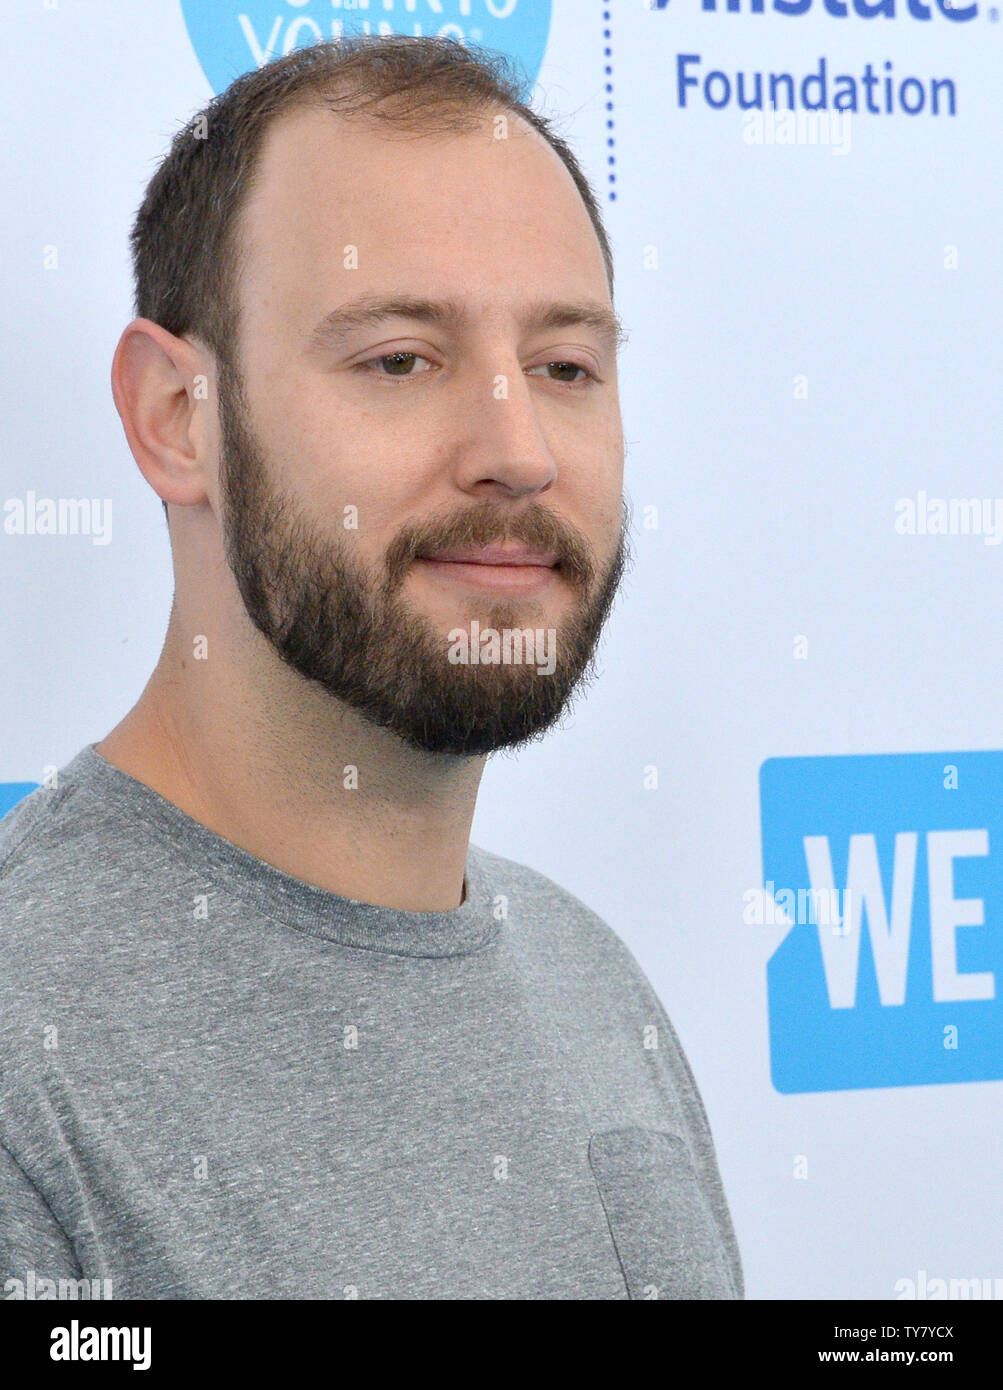 Screenwriter Evan Goldberg arrives for We Day California at The Forum in Inglewood, California on April 19, 2018. WE Charity, formerly known as Free The Children, is a worldwide development charity and youth empowerment movement founded in 1995 by human rights advocates Craig Kielburger and Marc Kielburger. Photo by Jim Ruymen/UPI Stock Photo